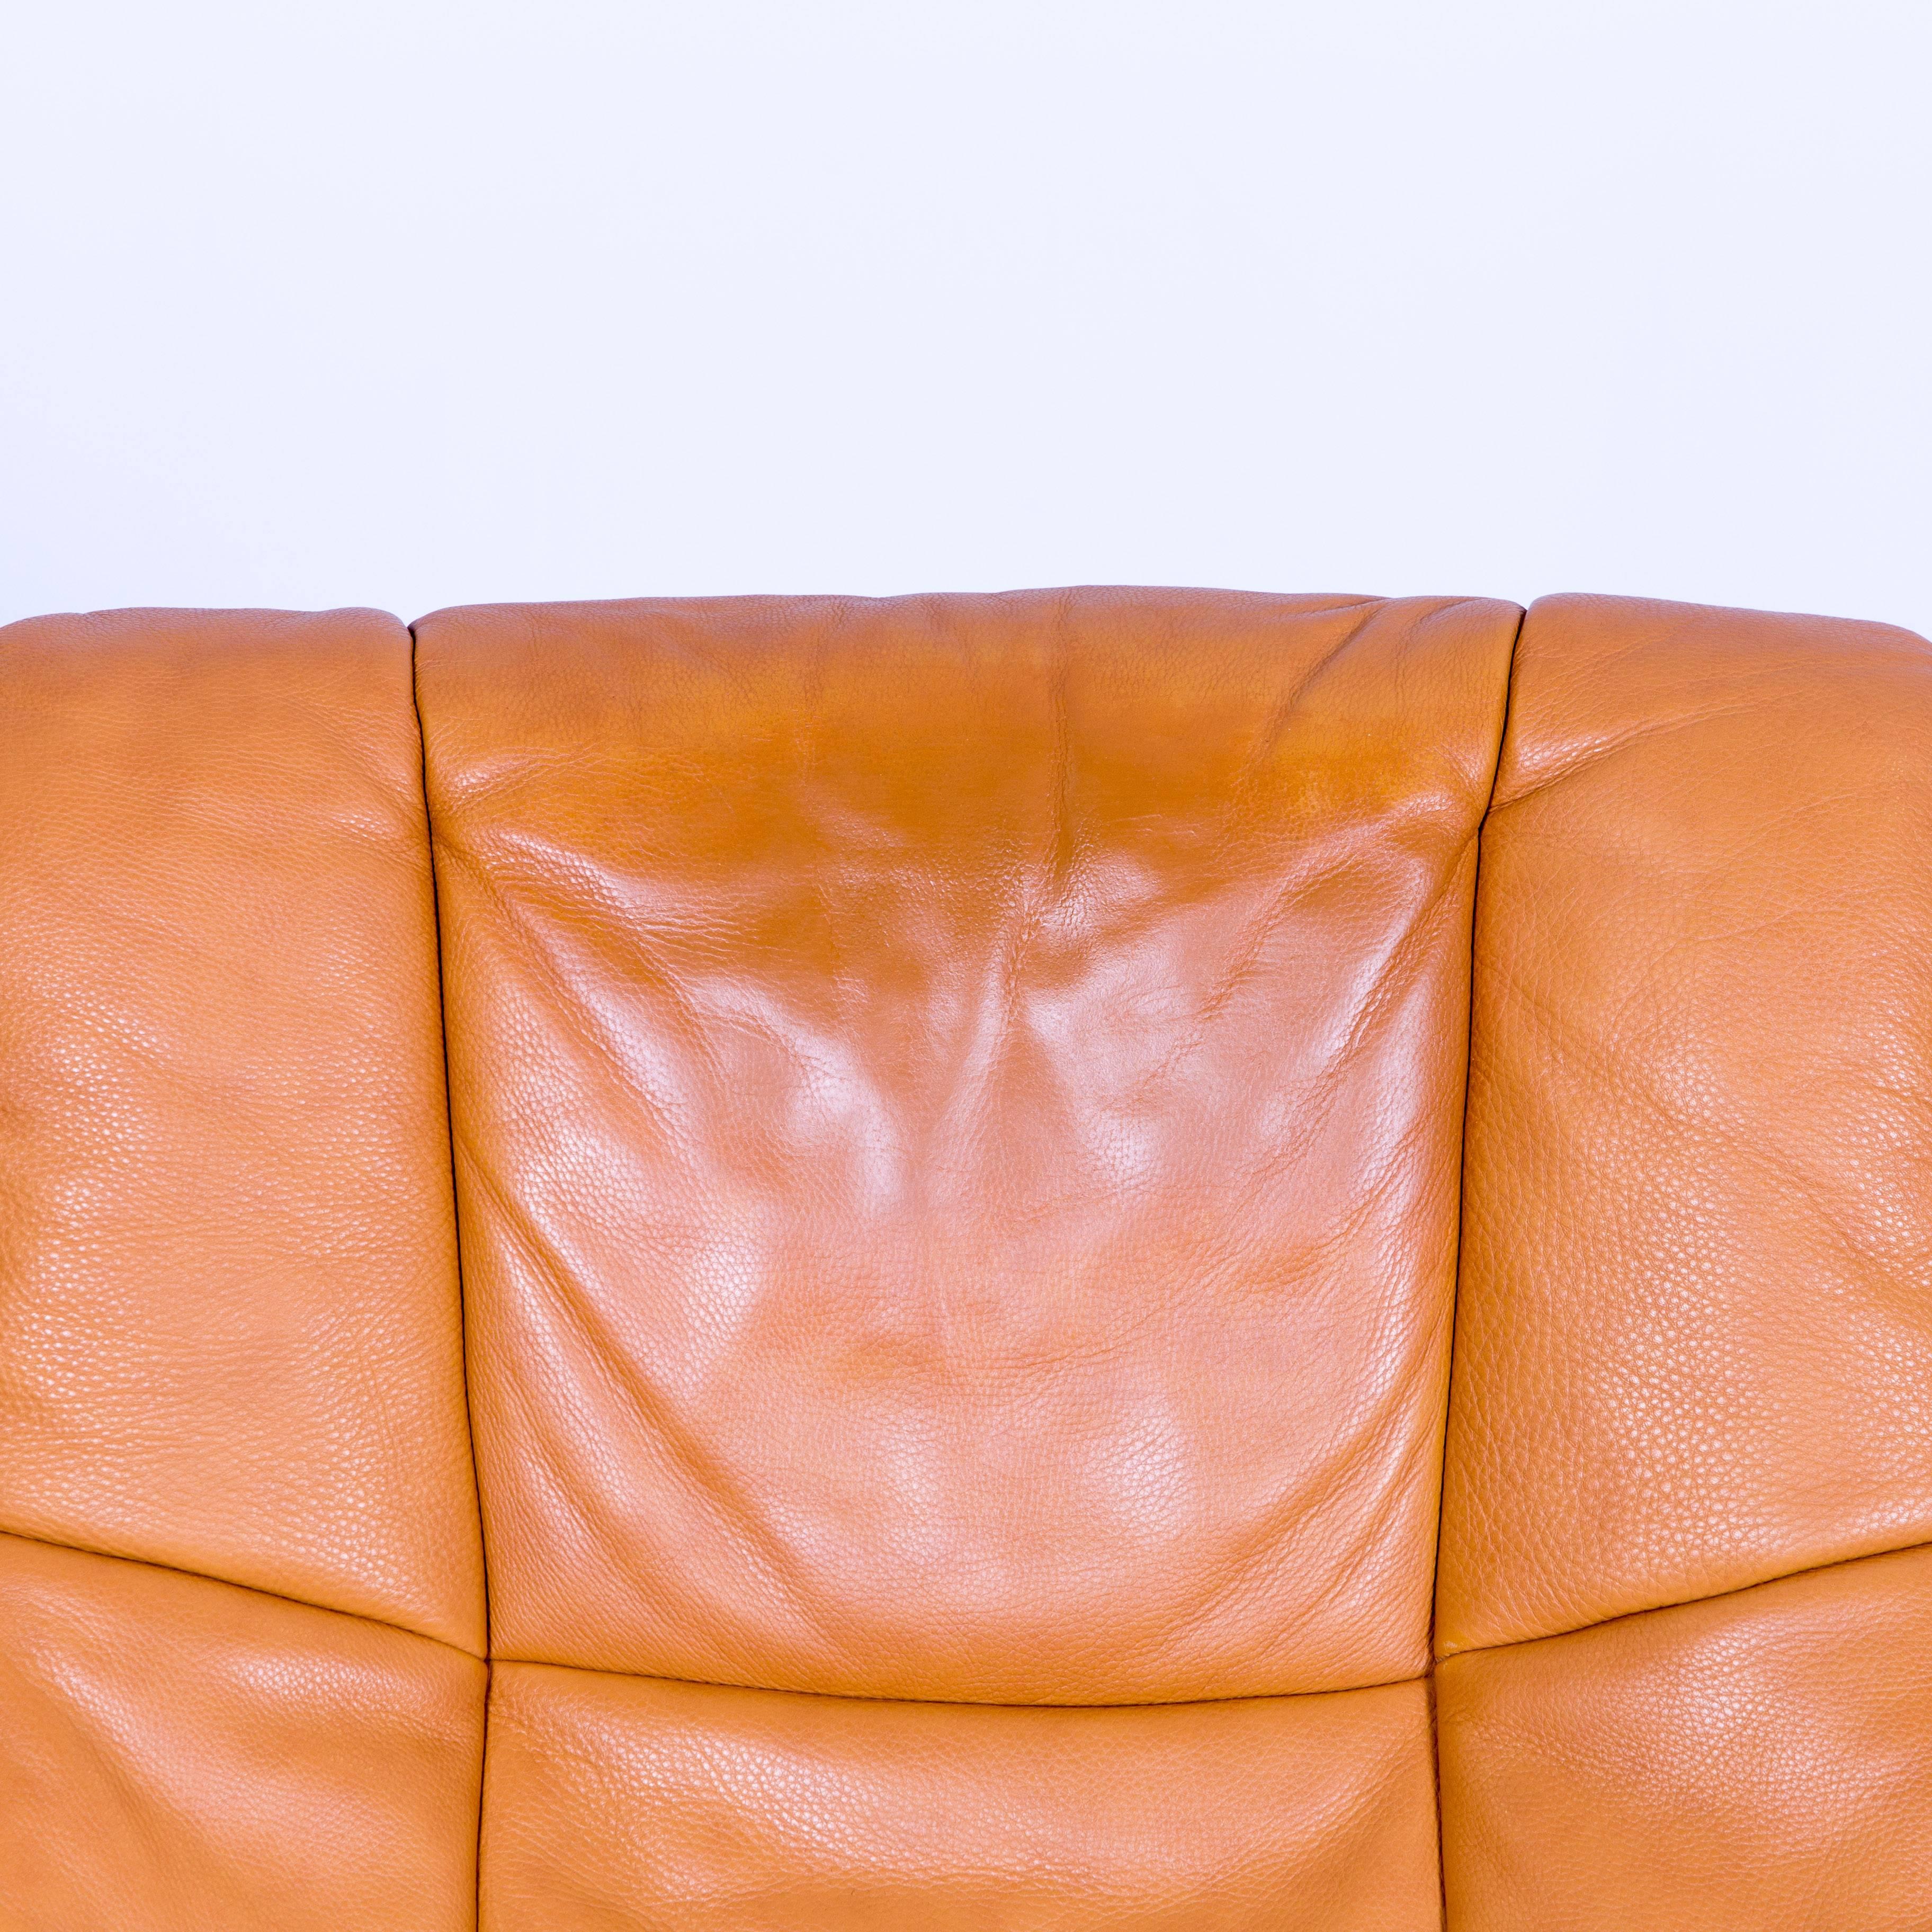 Stressless Mayfair Relax Armchair Footstool Orange Brown Leather Relax Recliner 1